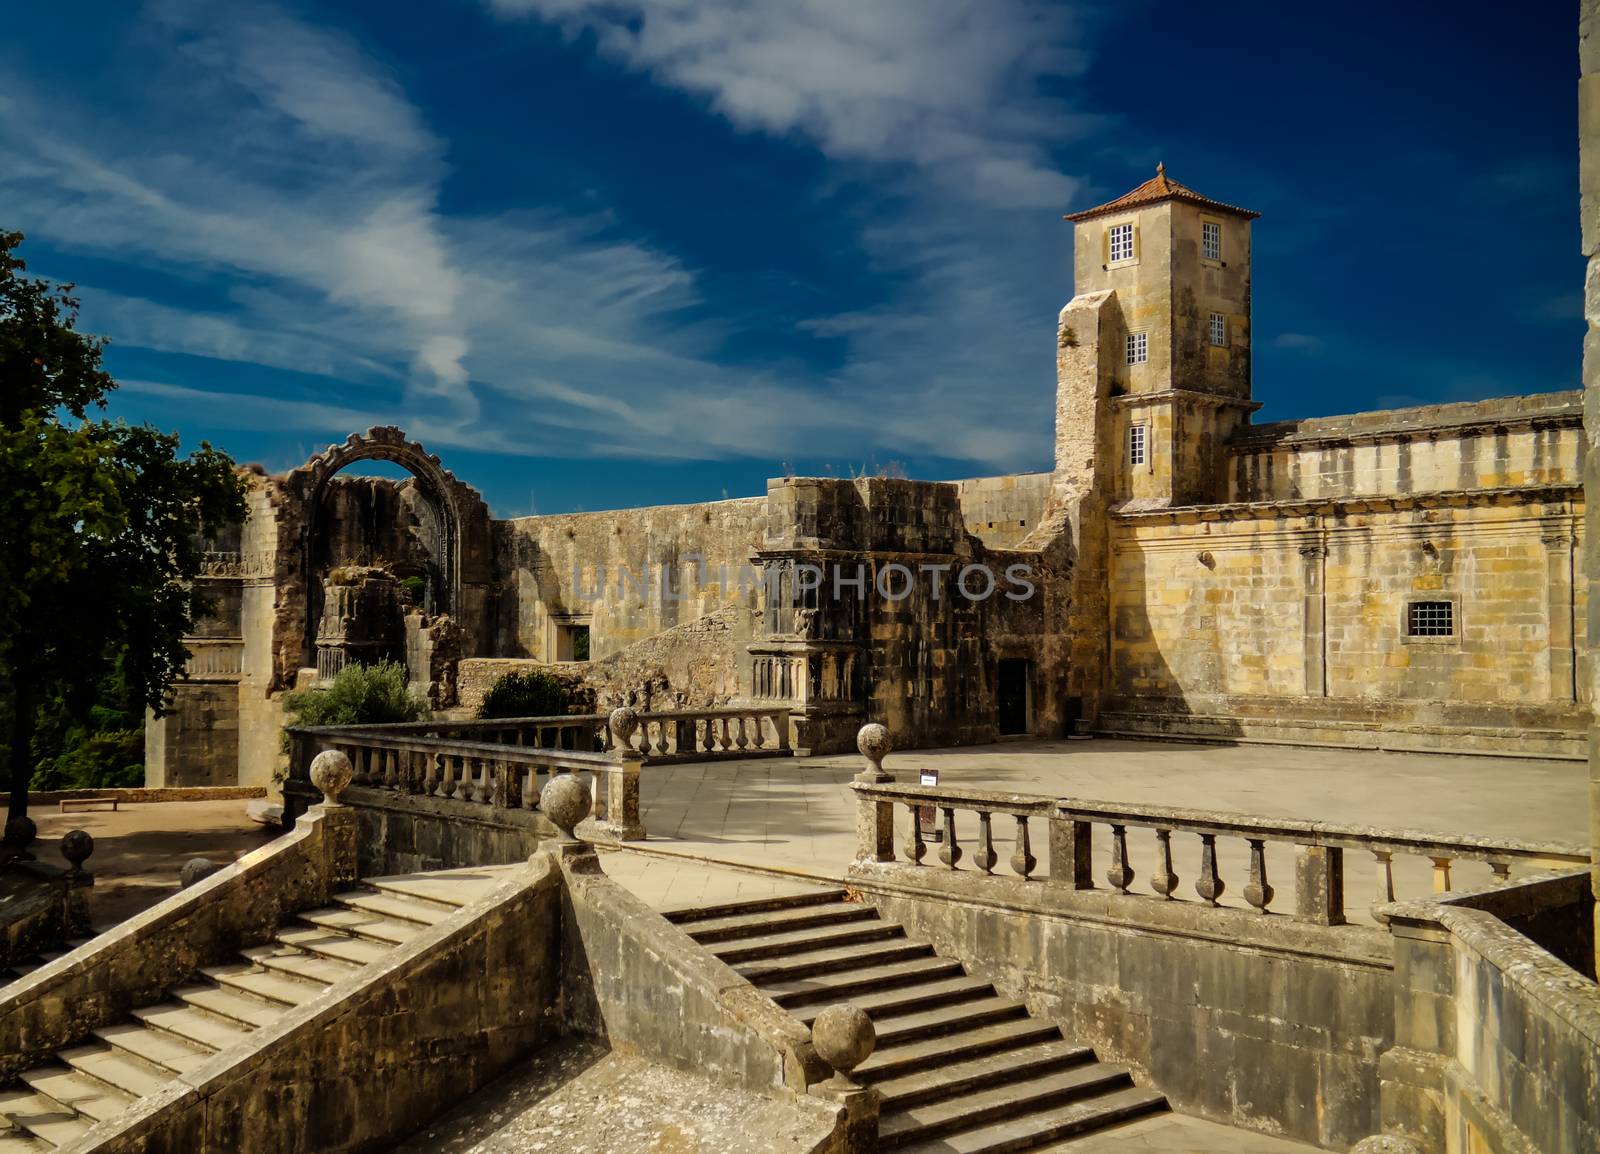 Exterior of Templar church of the Convent of the Order of Christ, Tomar, Portugal by homocosmicos